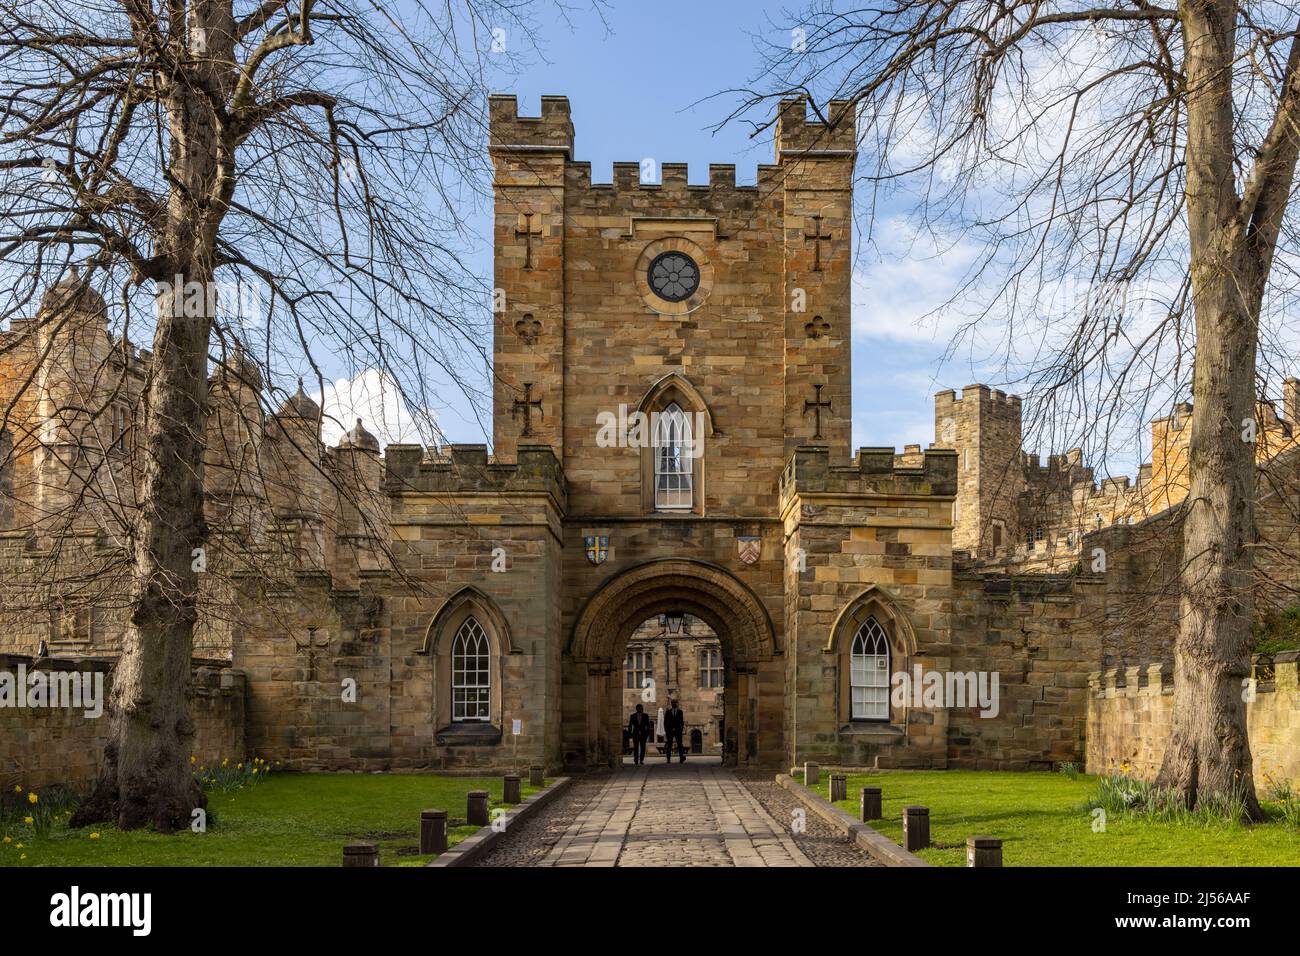 The entrance to Durham Castle, a Norman castle in the city of Durham, England, which has been occupied since 1837 by University College, Durham. Stock Photo